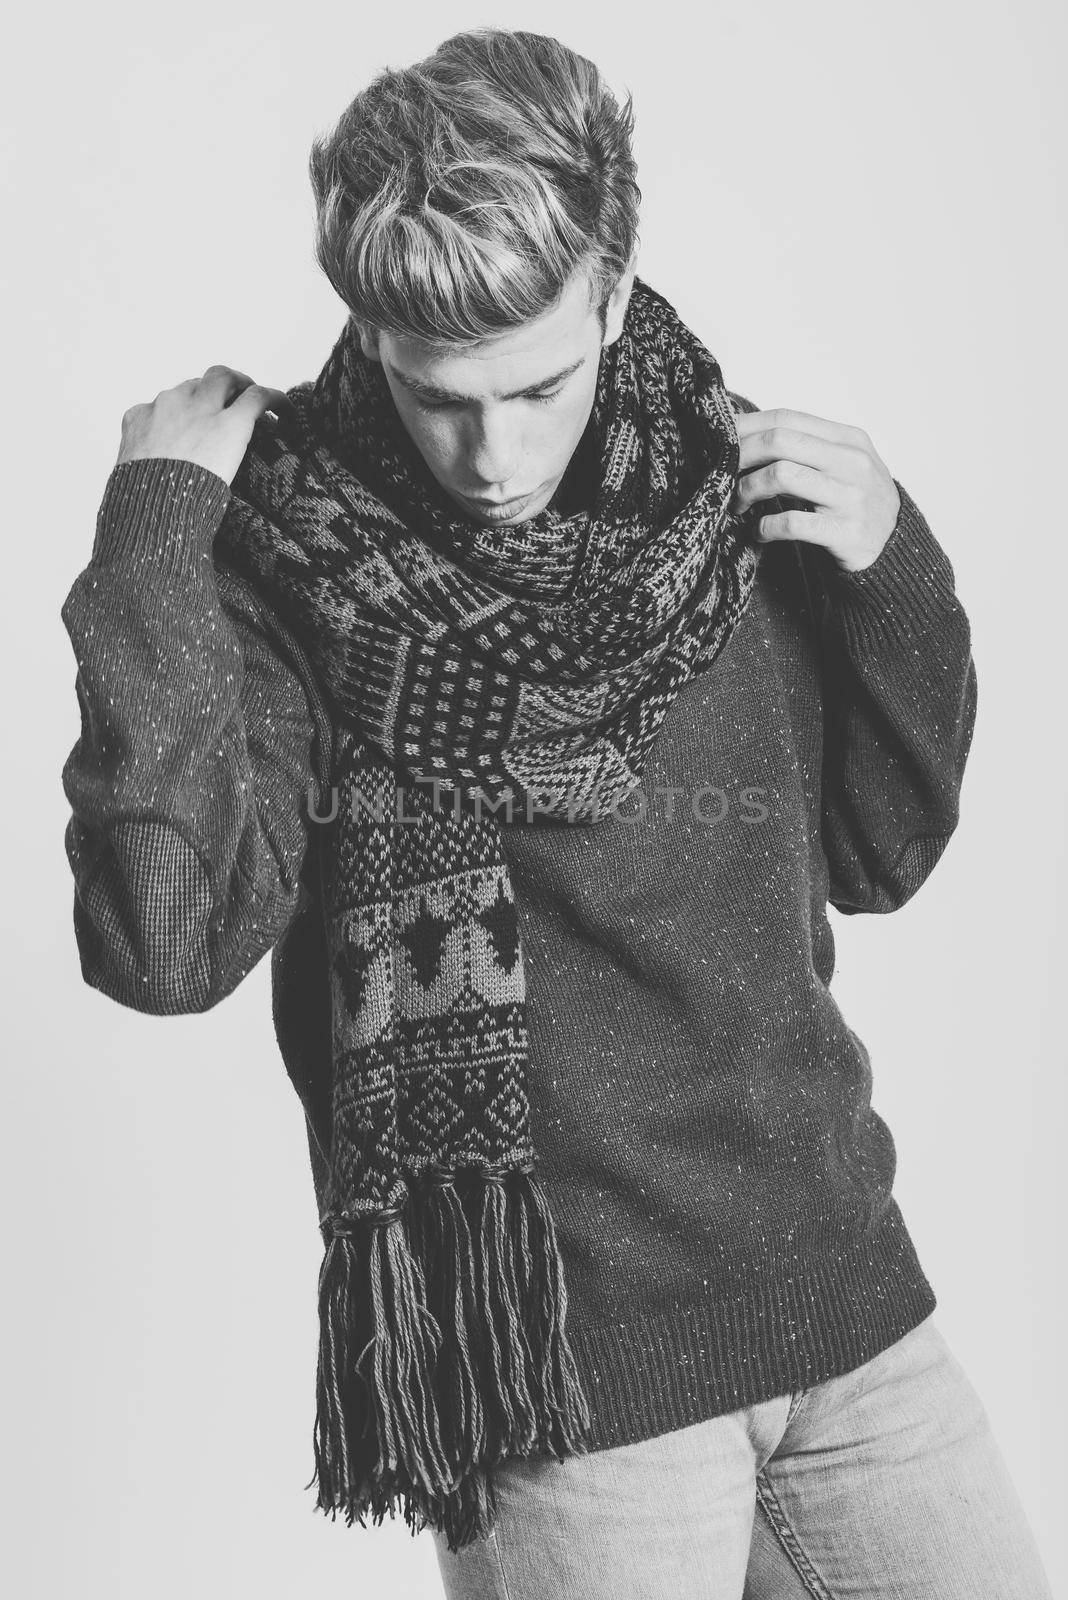 Portrait of handsome blonde man wearing sweater and scarf